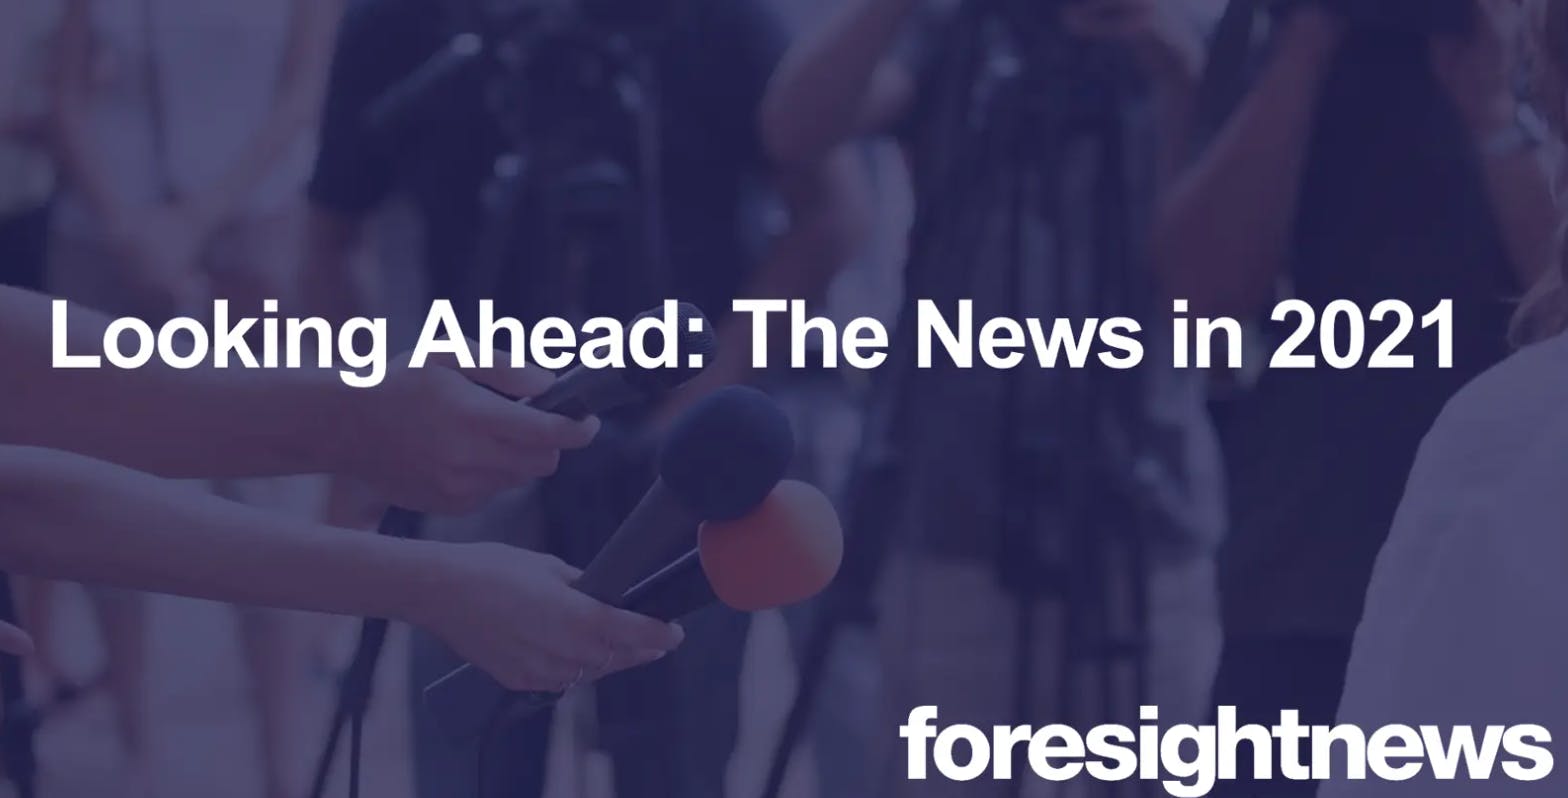 Looking Ahead: The News in 2021